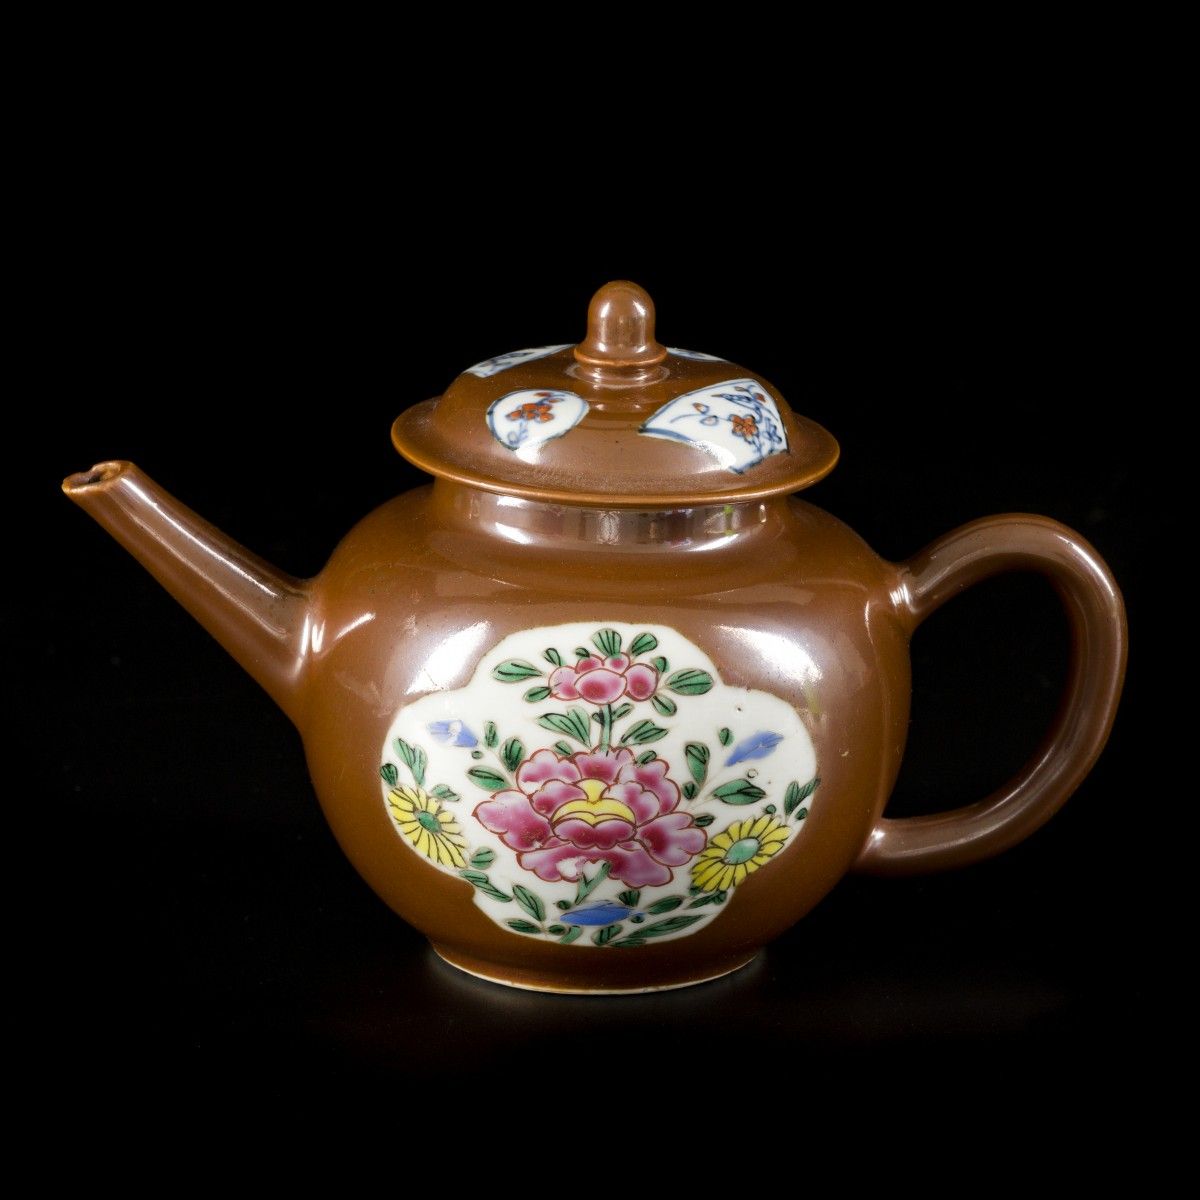 A porcelain famille rose teapot with lid, capucine exterior, China, 18th century&hellip;